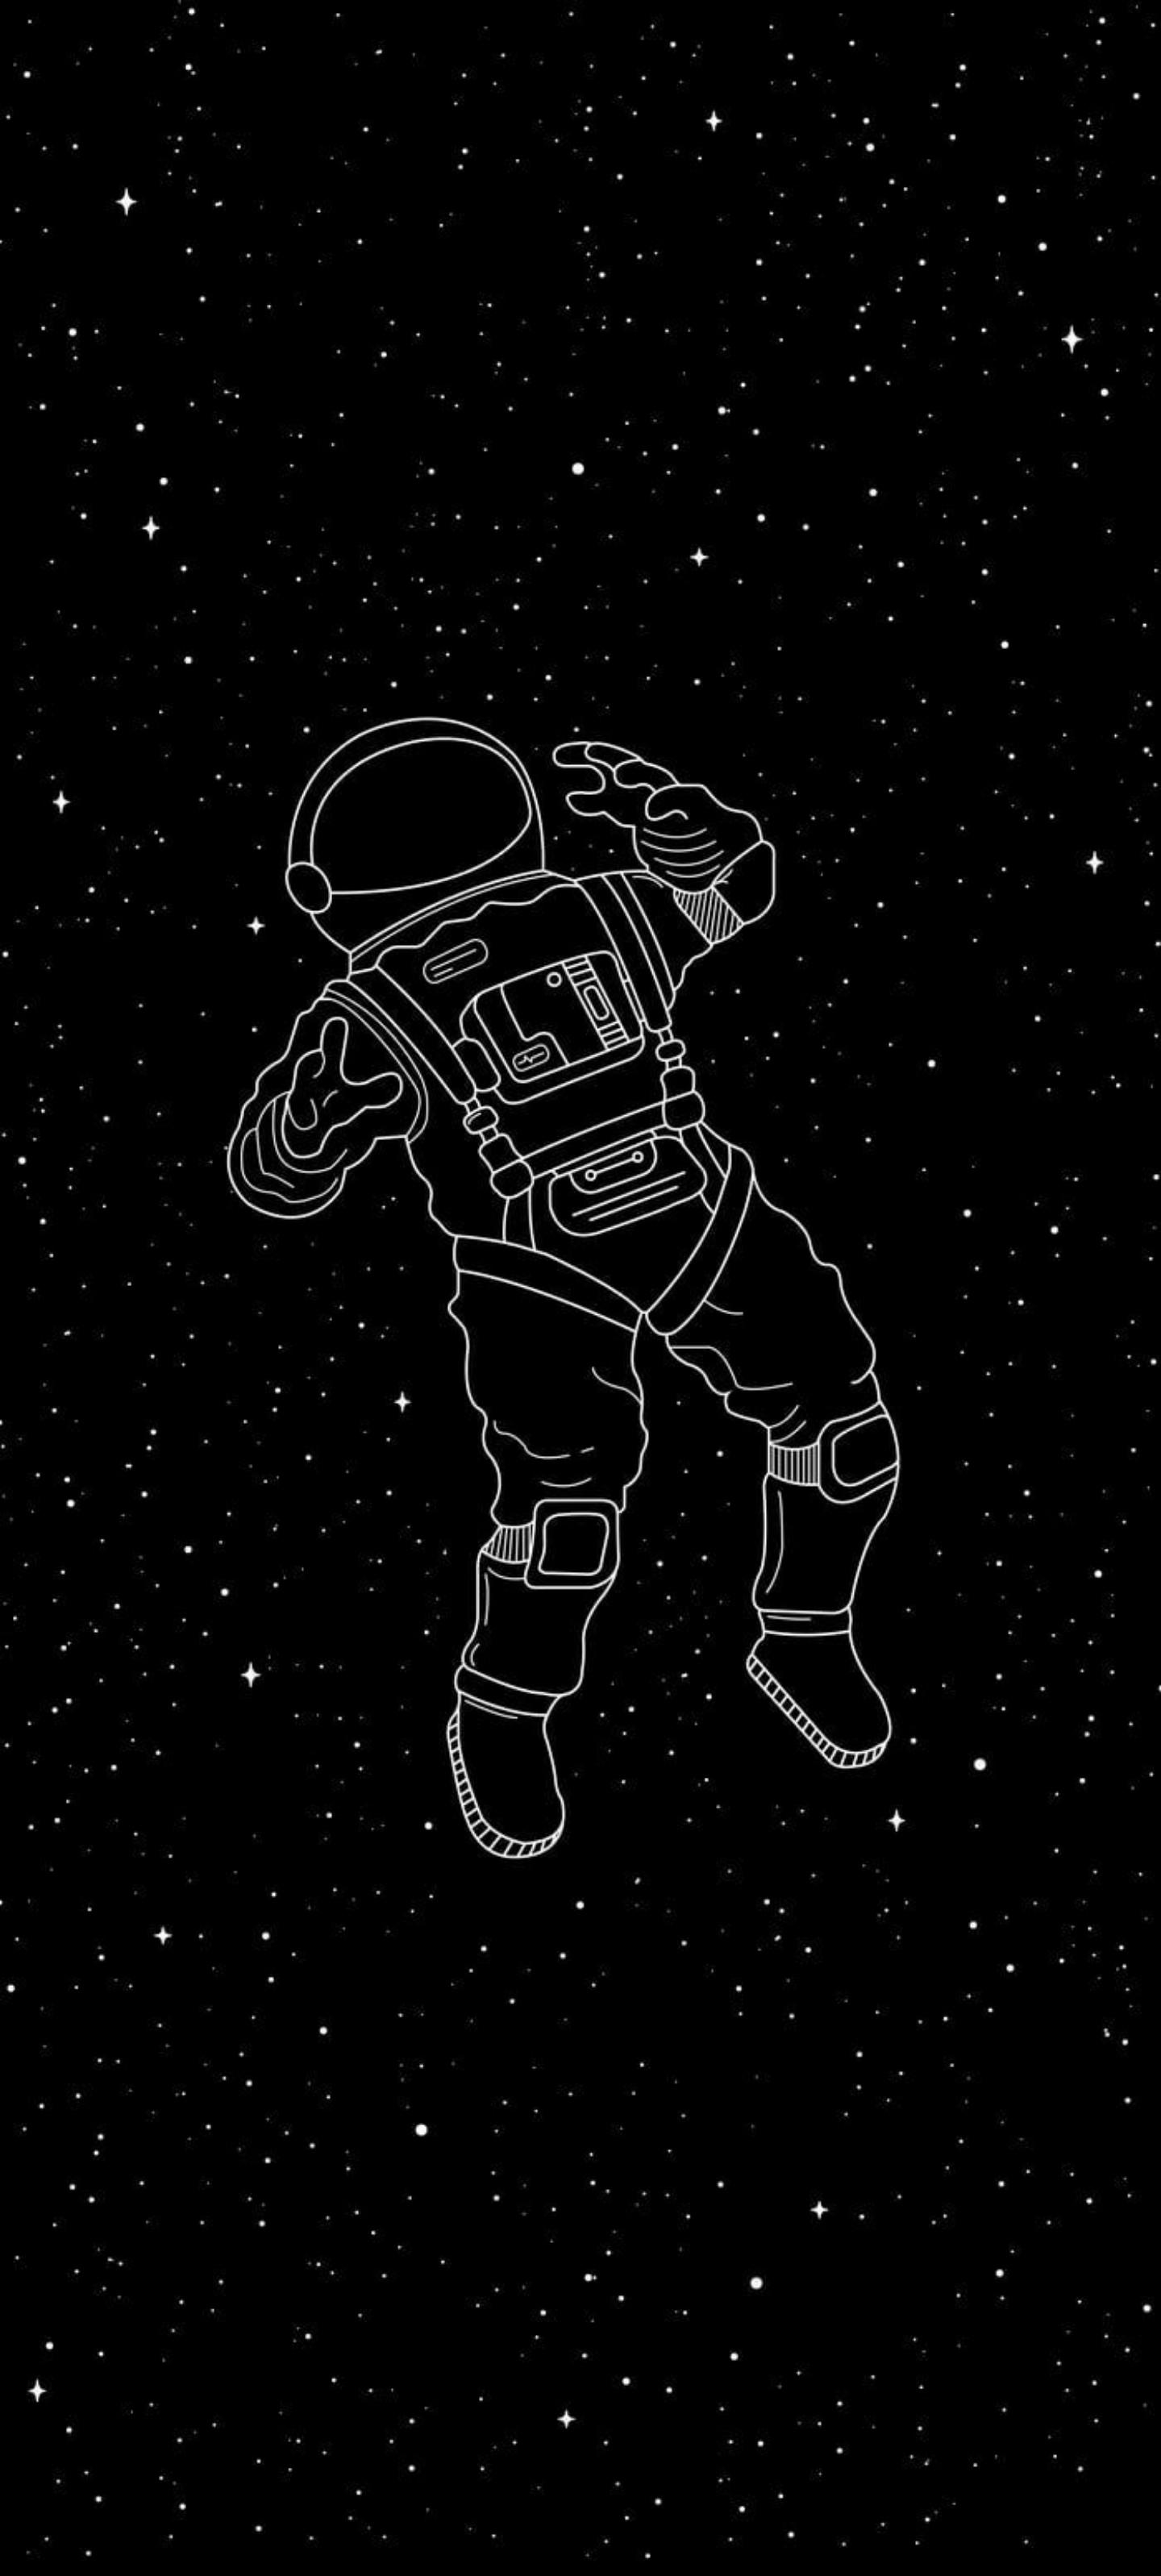 Floating In Space Wallpapers Top Free Floating In Space Backgrounds Wallpaperaccess 4702